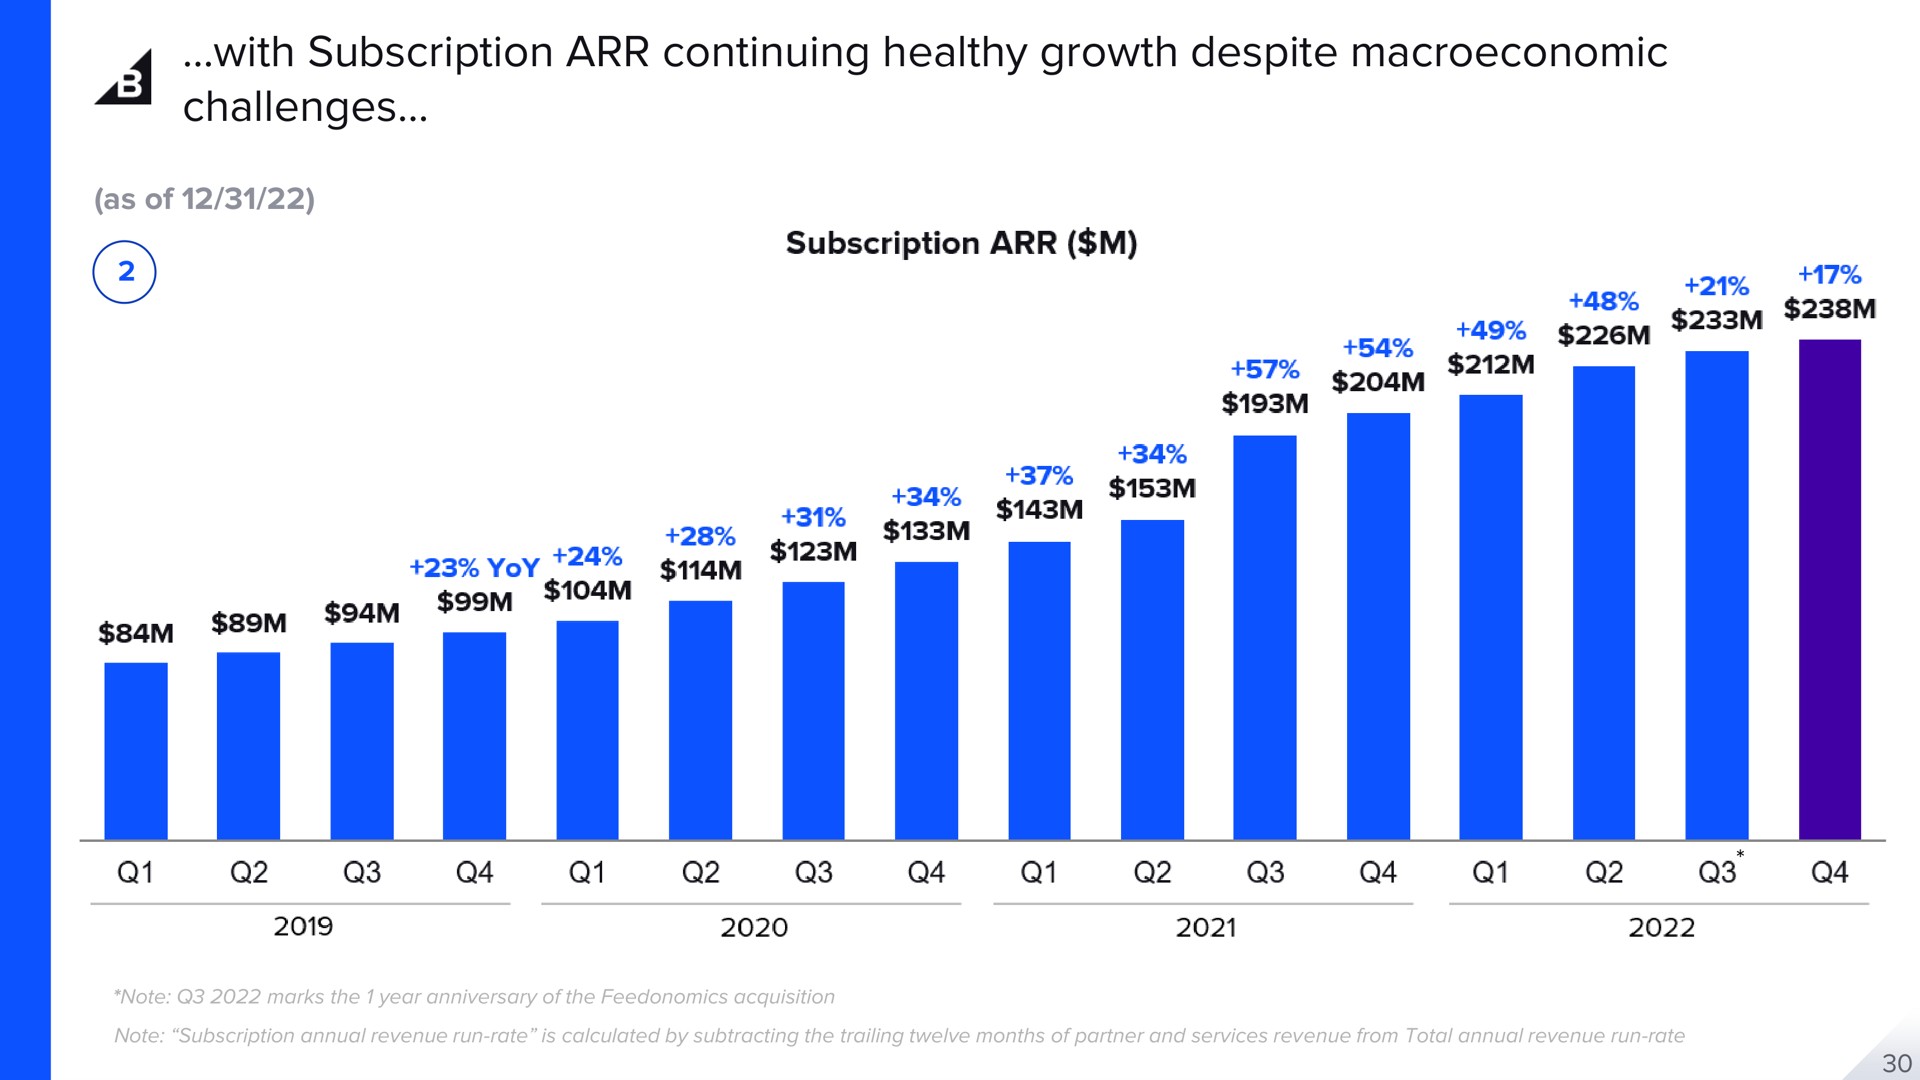 with subscription continuing healthy growth despite challenges a seam | BigCommerce